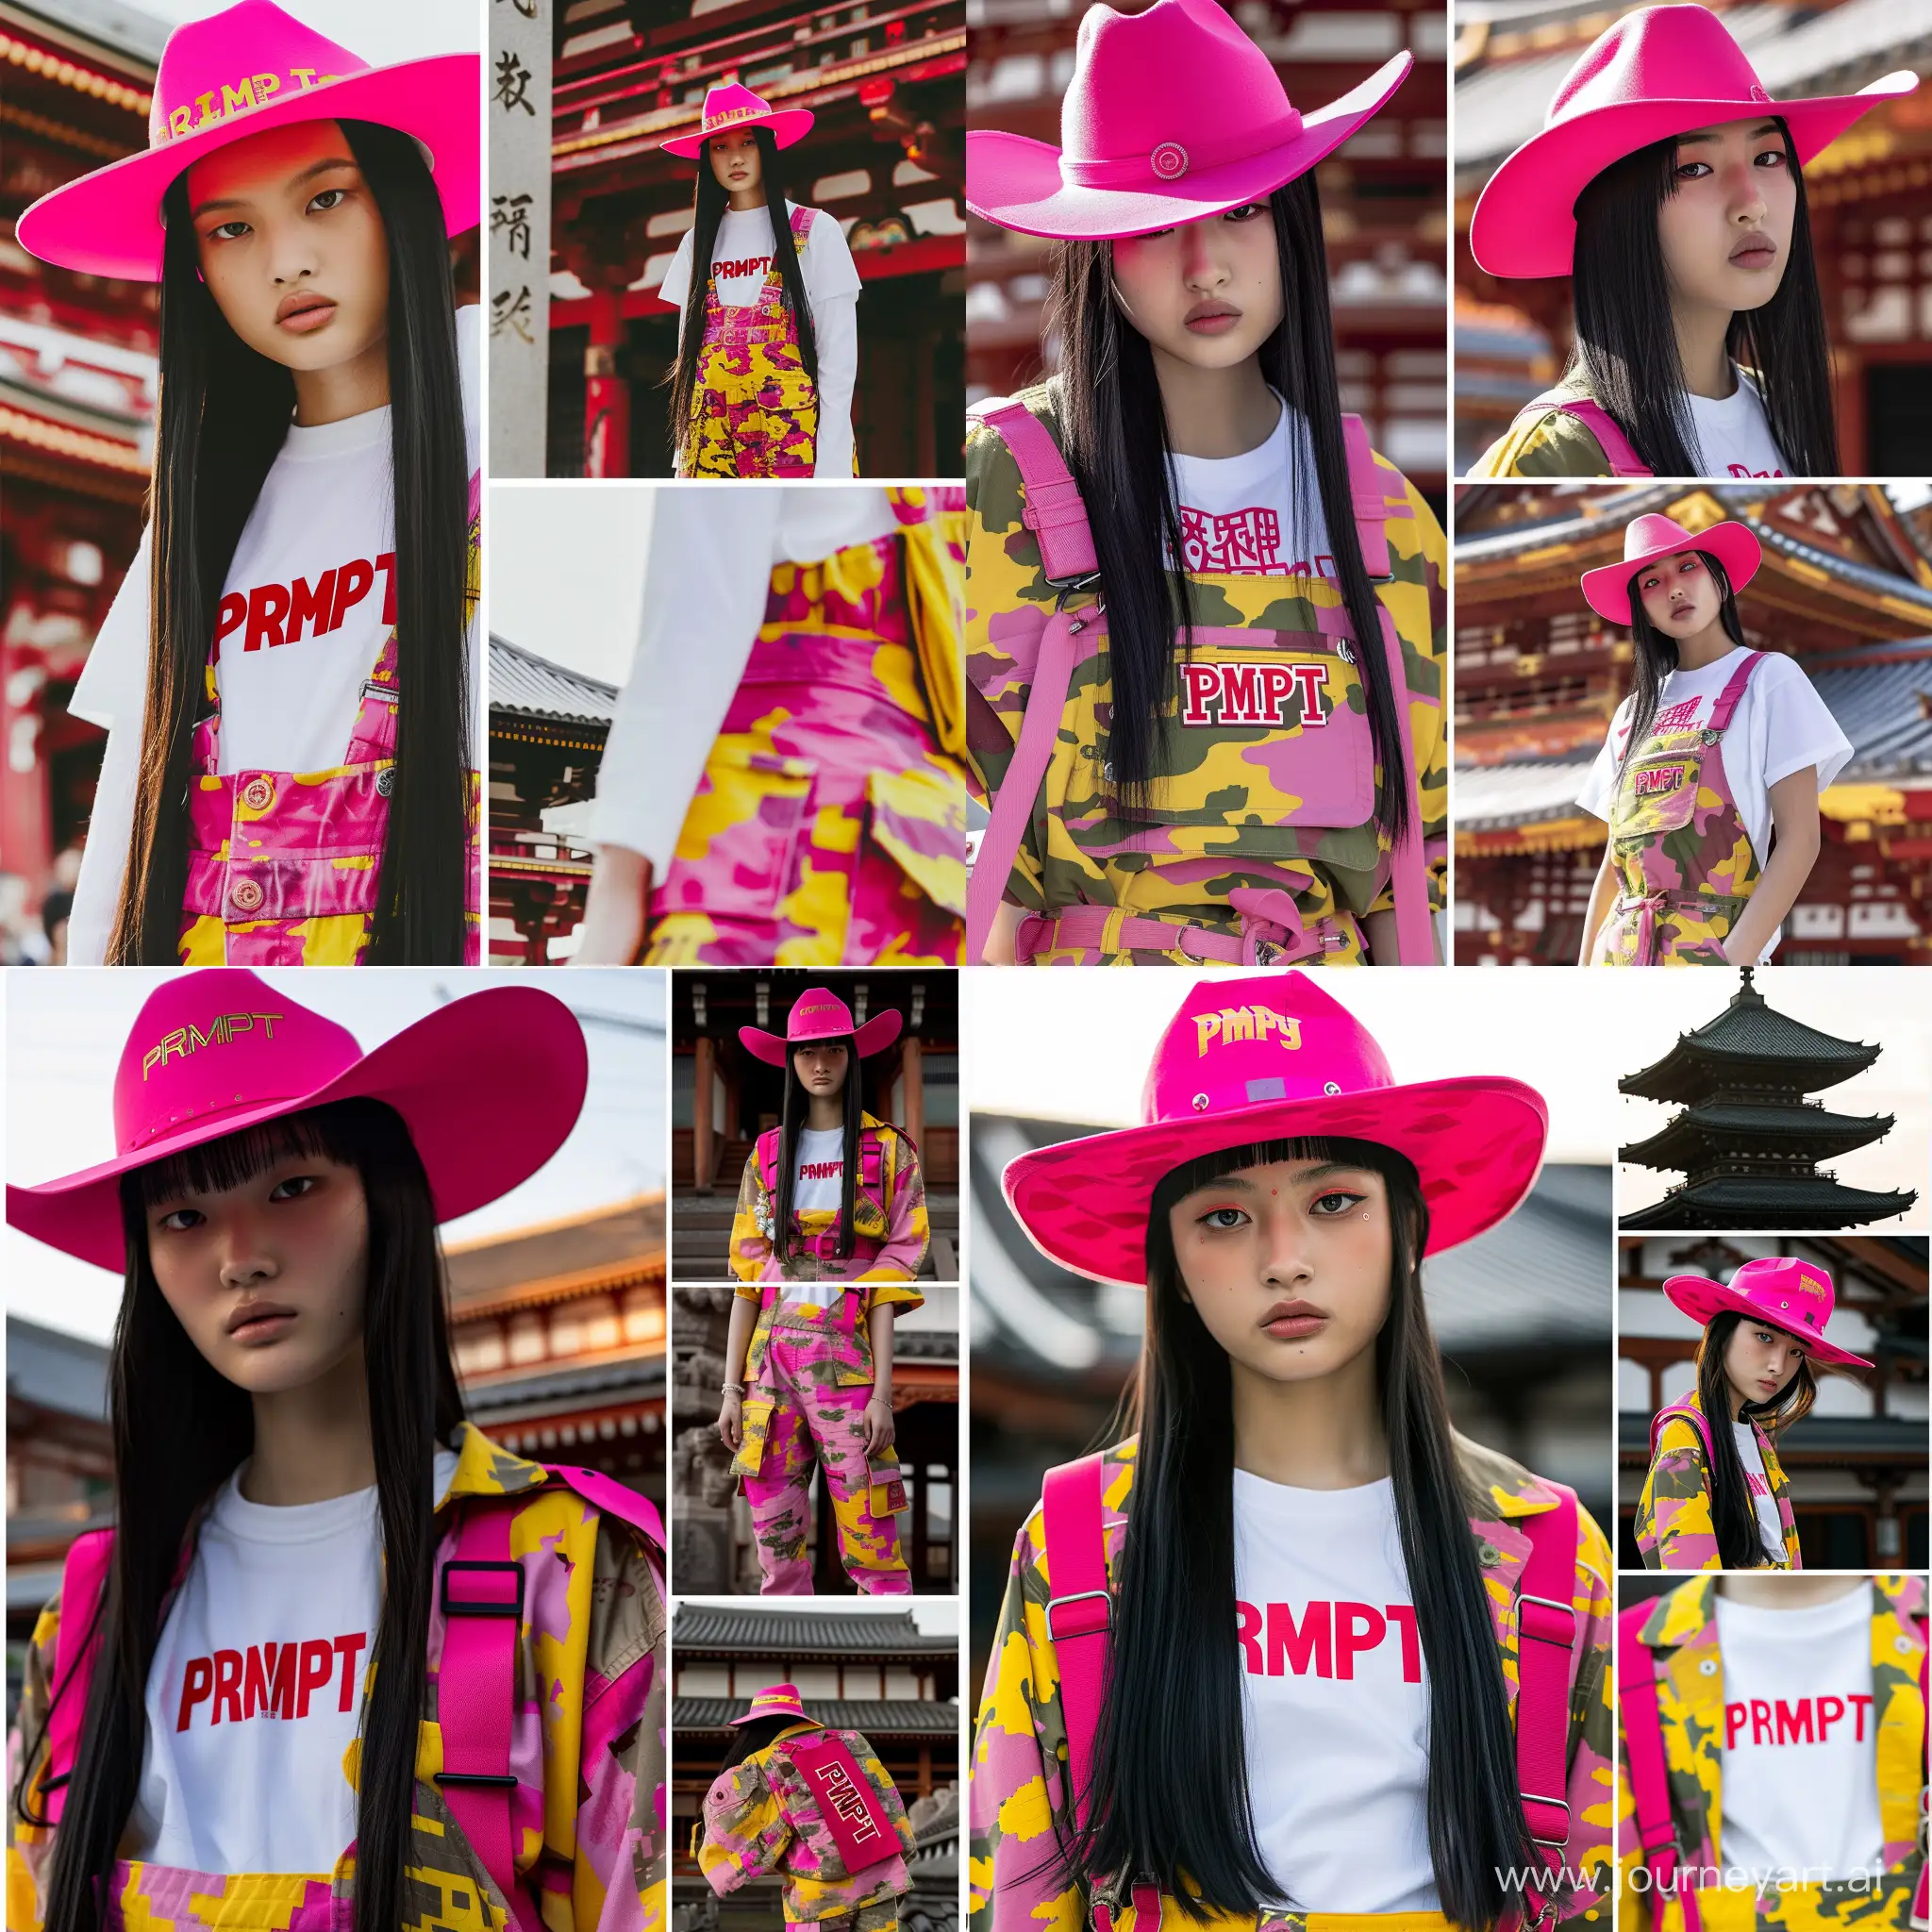 editorial fashion shot, asian ethnicity, long straight black hair, intense gaze, pale complexion, neon pink cowboy hat, vibrant yellow and pink camo overalls and jacket, white tee with red “PRMPT” branding traditional Japanese temple backdrop, high contrast daylight, vivid and playful mood,split into multiple different images shot from multiple different angles 